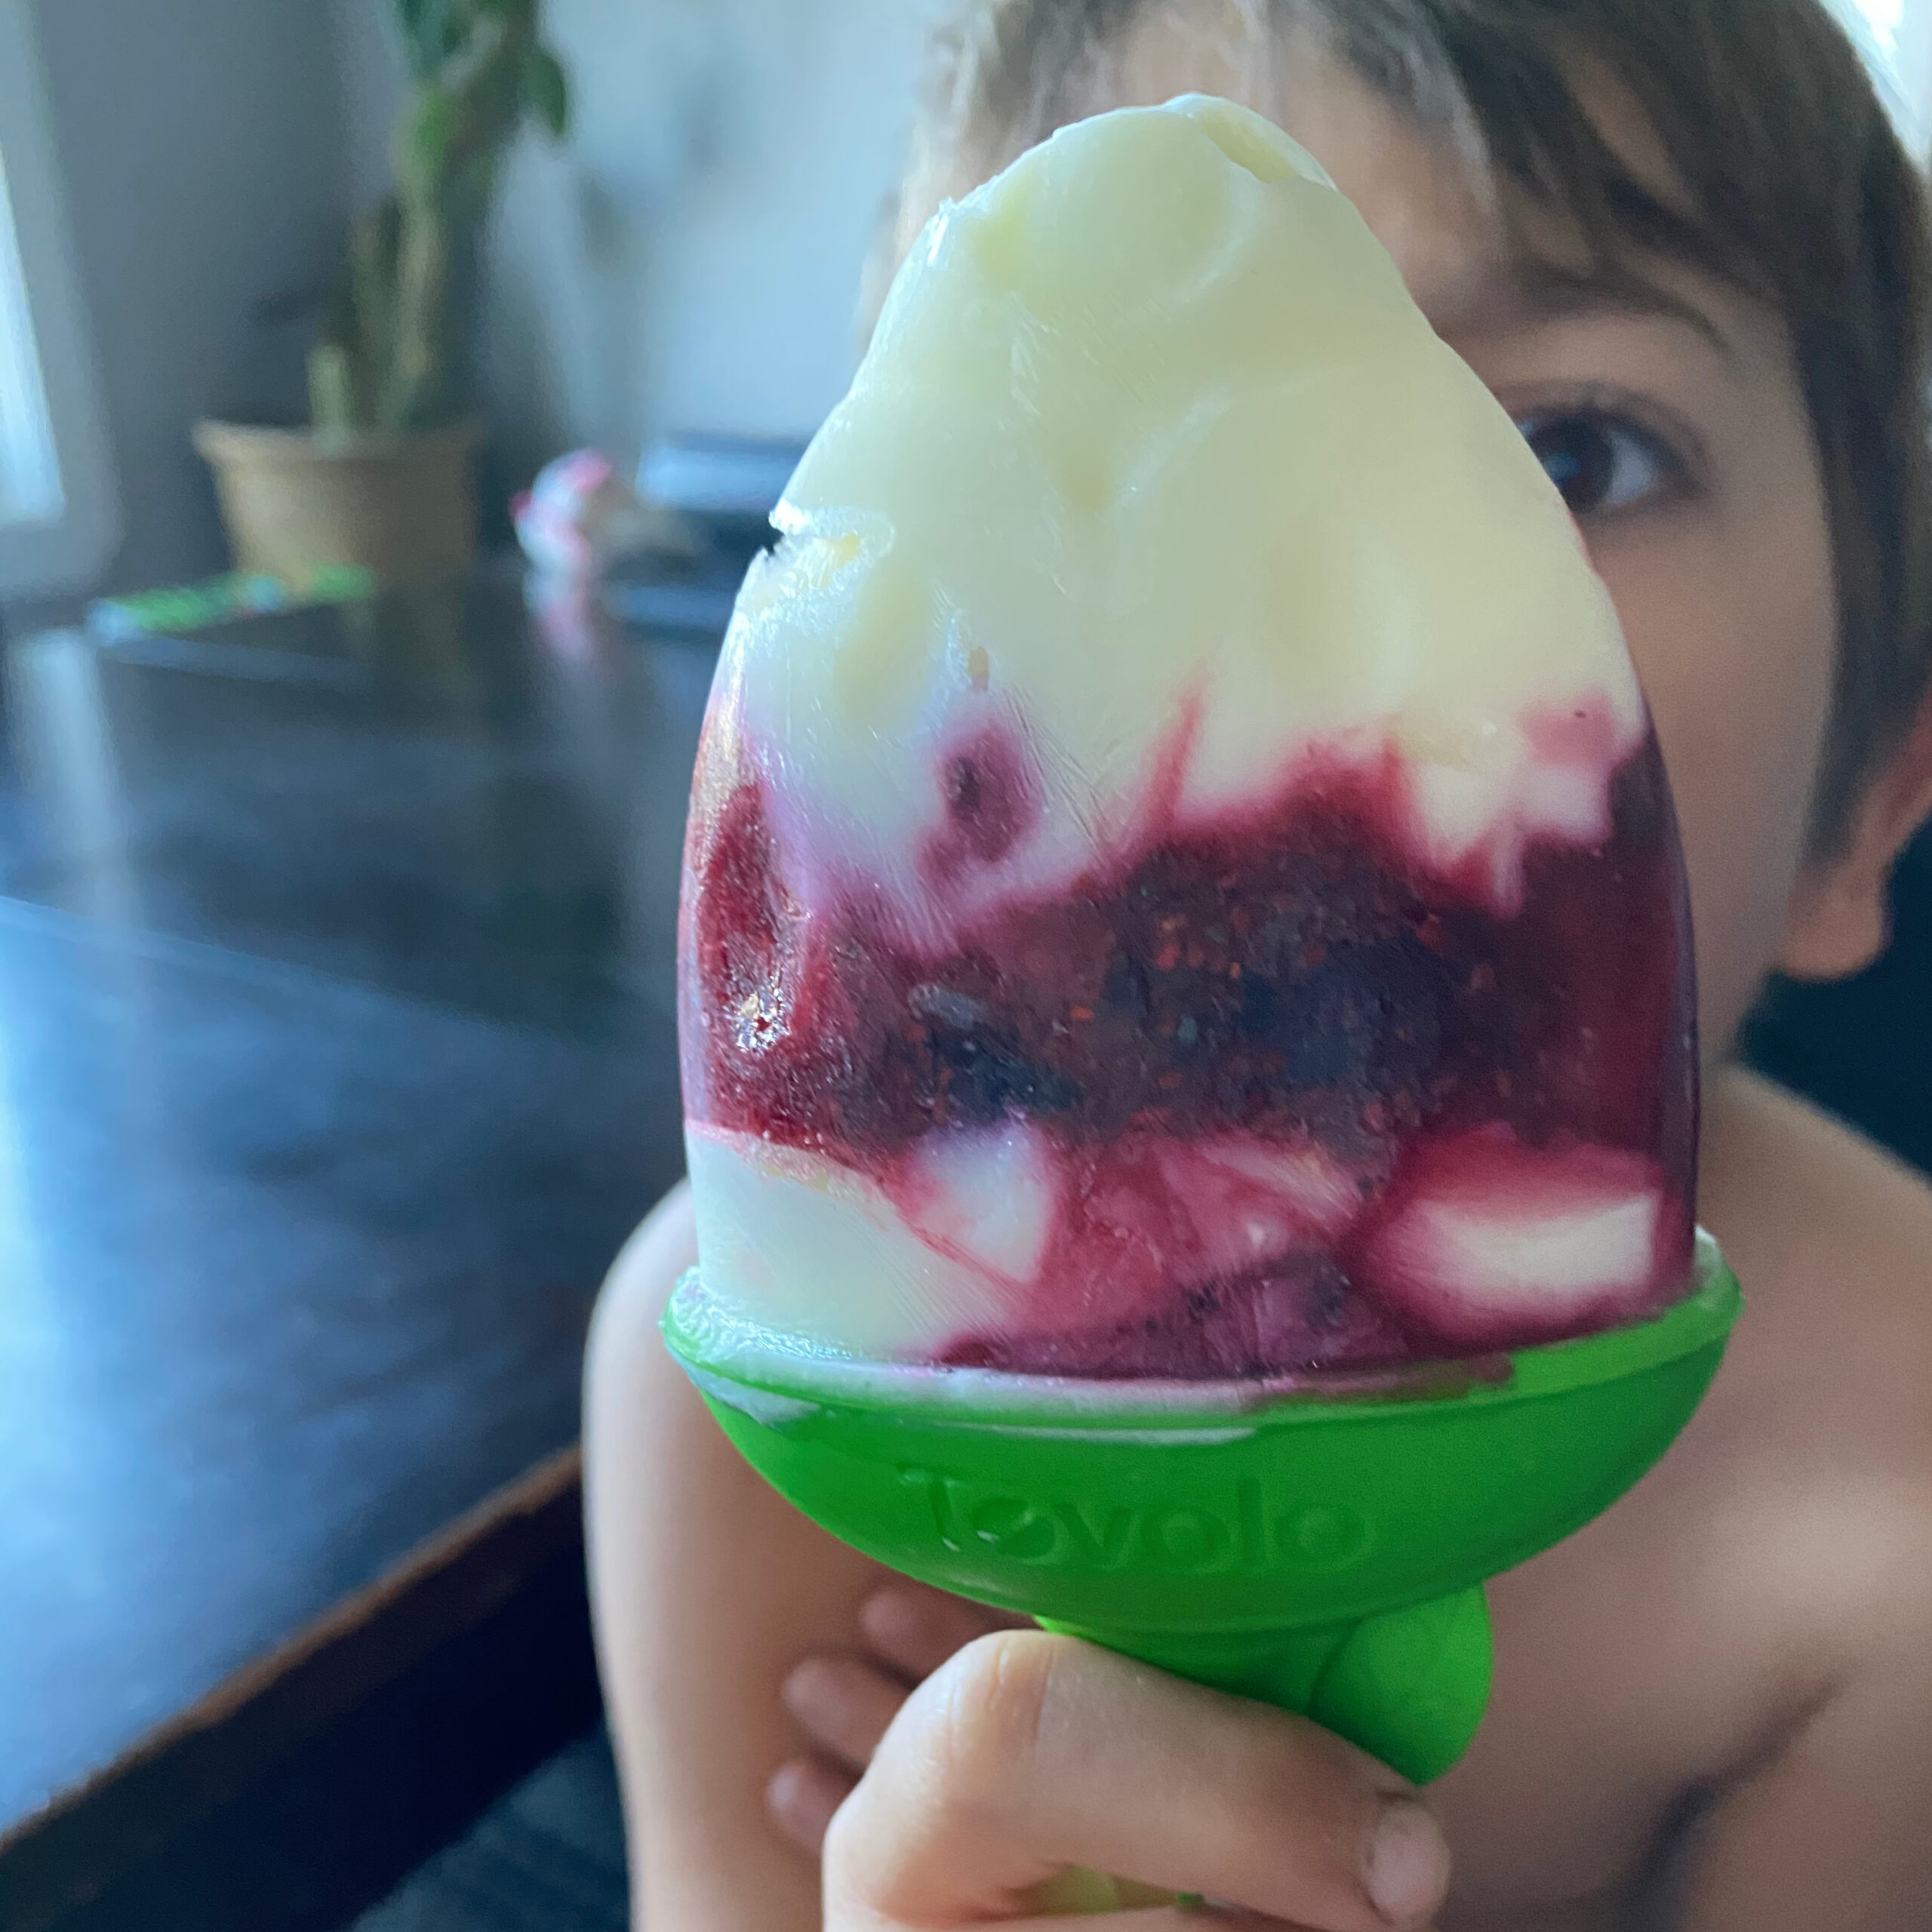 Child holding a white and red popsicle in front of his face